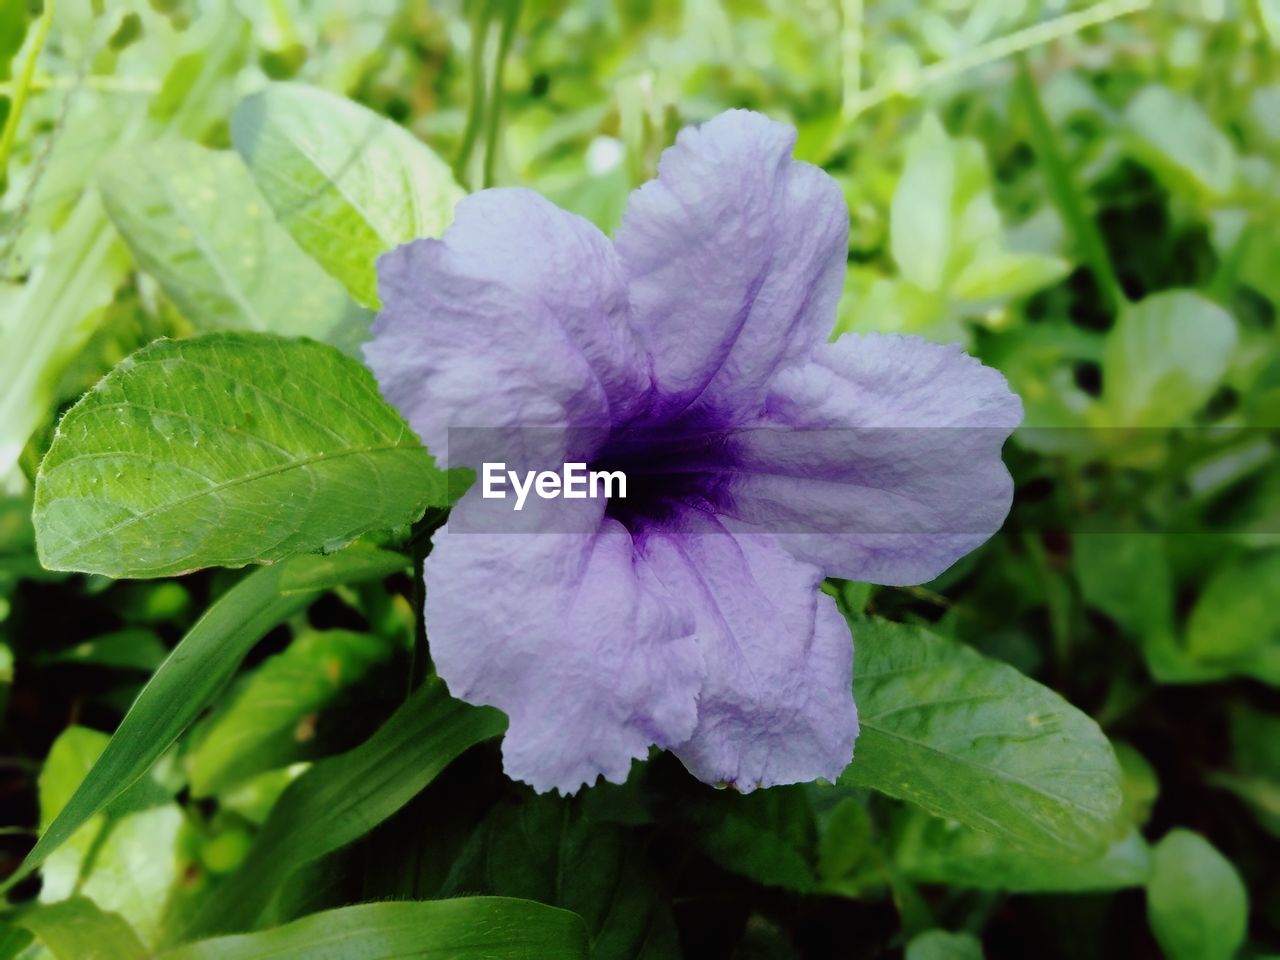 CLOSE-UP OF PURPLE FLOWER ON PLANT